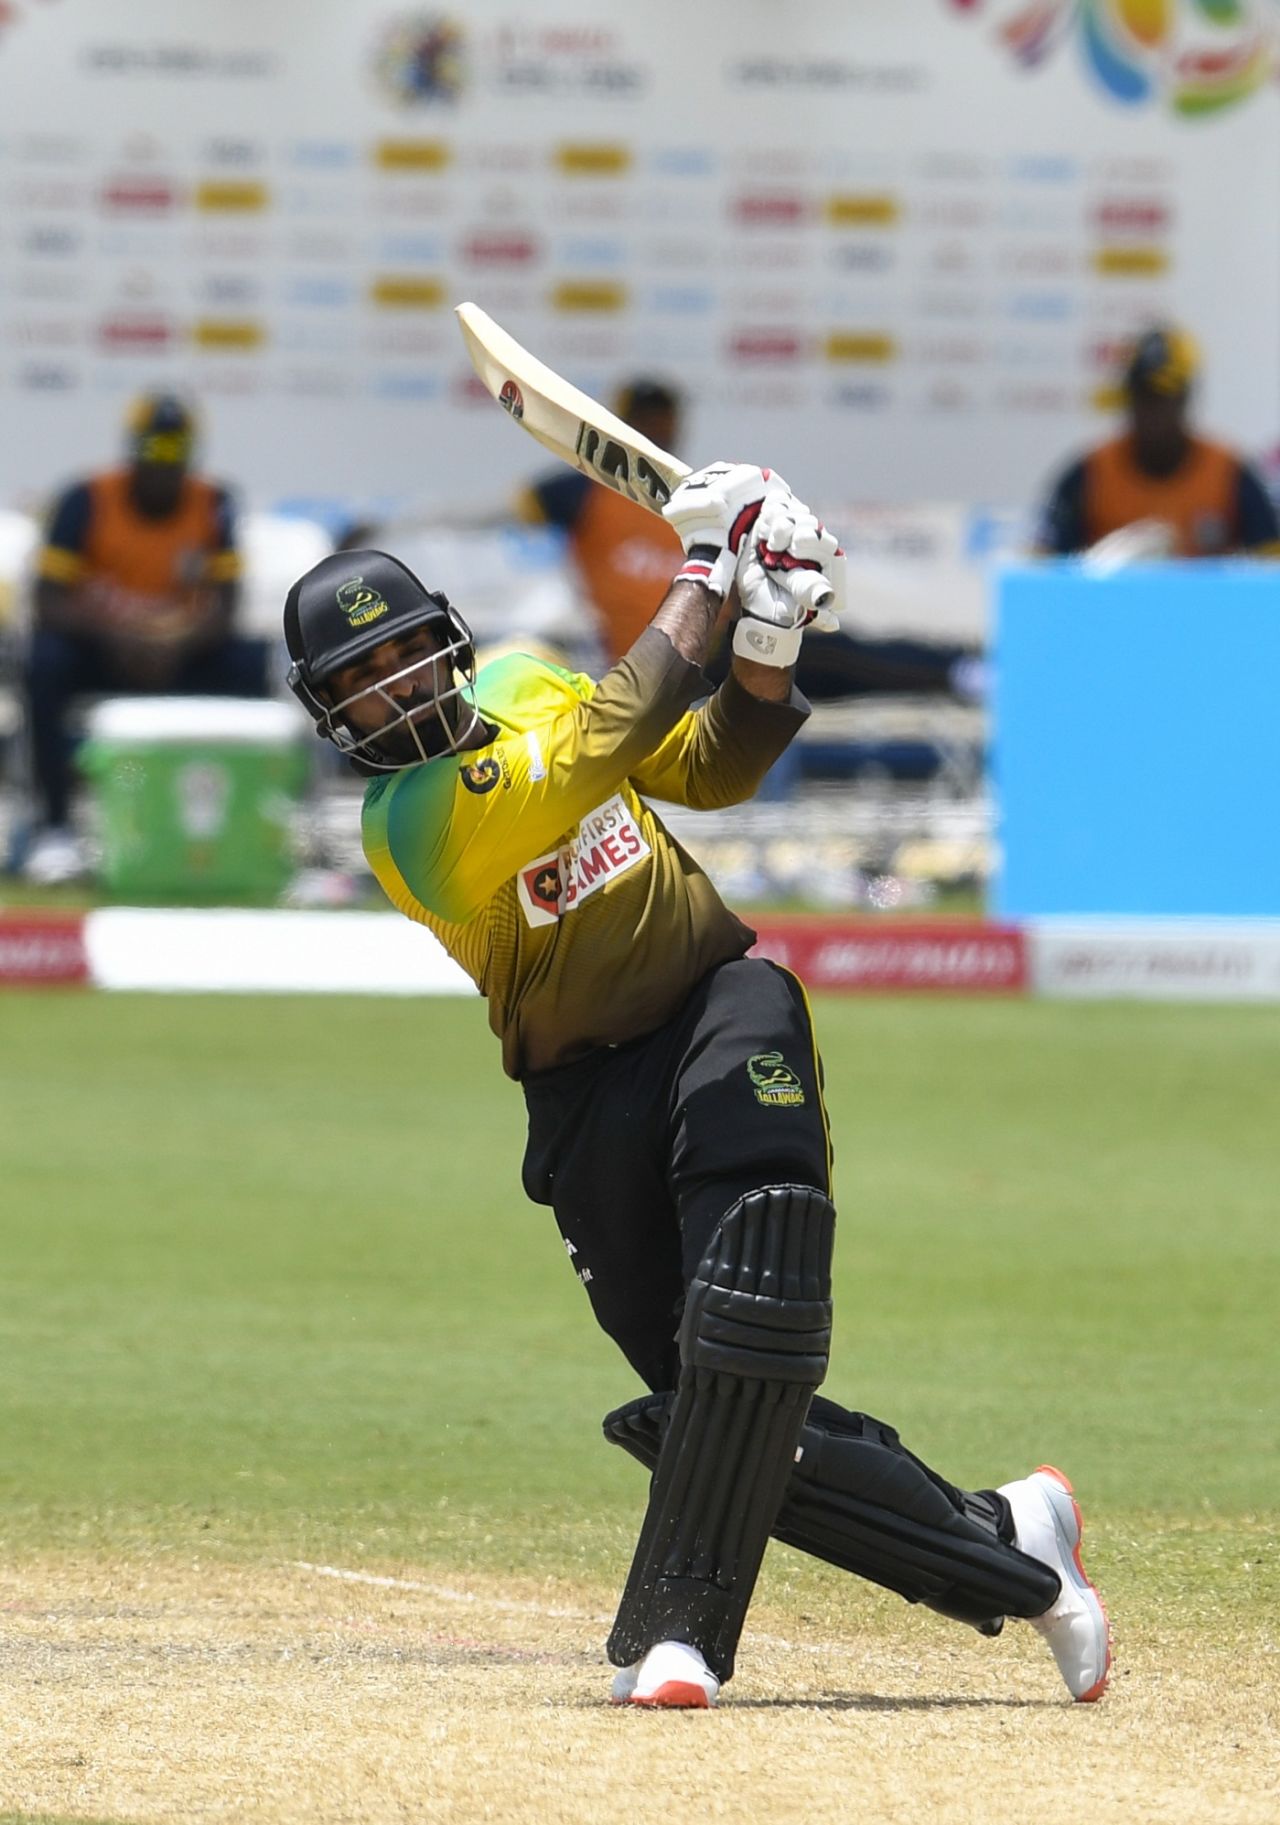 Asif Ali clubs one away on CPL debut, Jamaica Tallawahs v St Lucia Zouks, Trinidad, CPL 2020, August 19, 2020